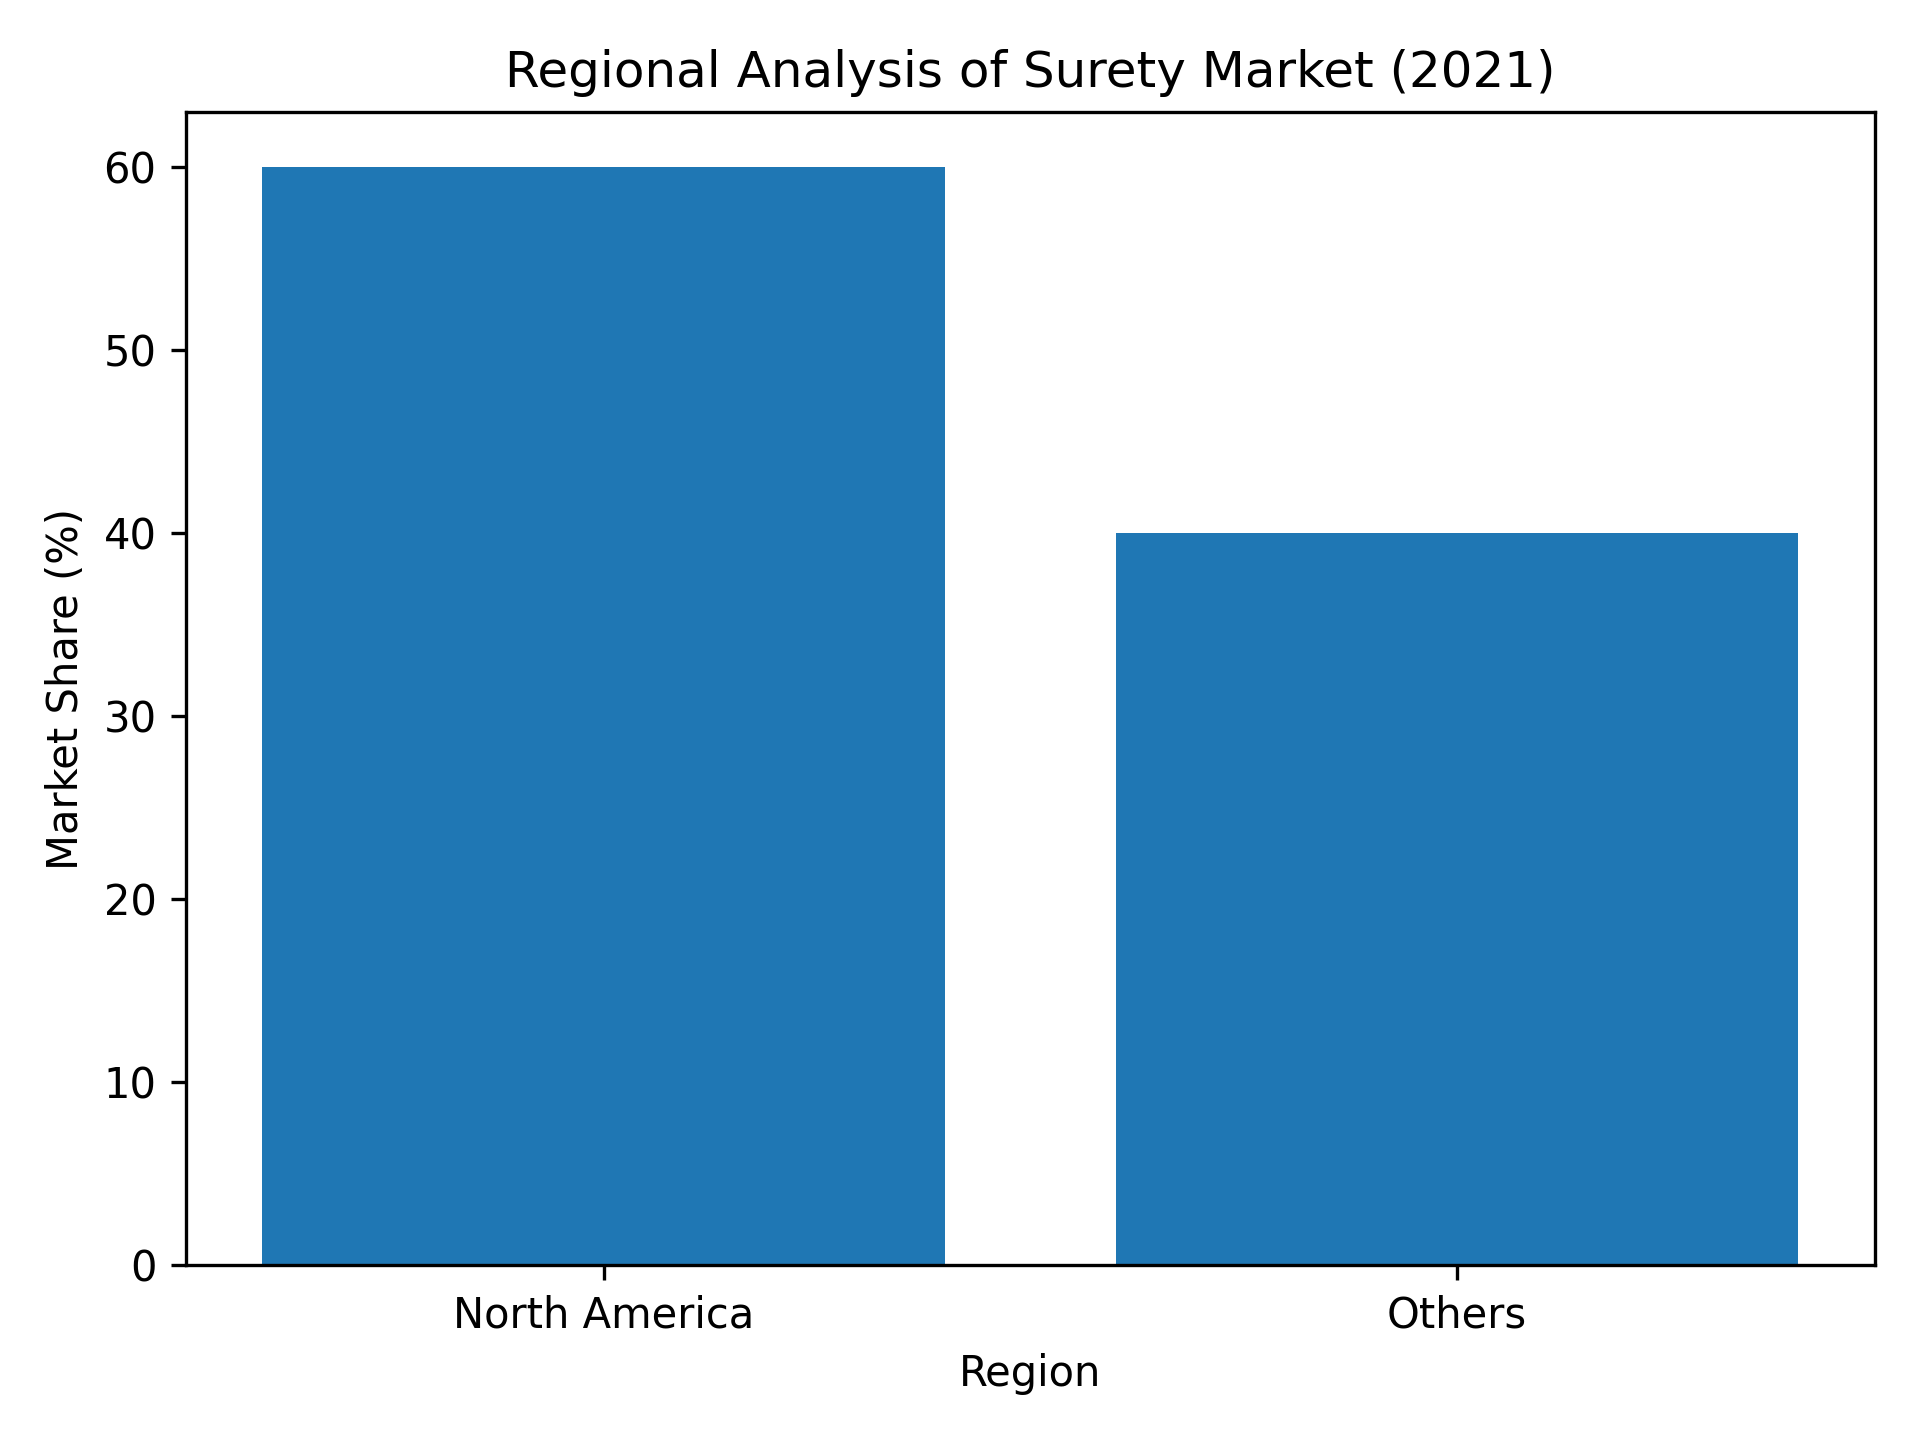 Surety Market Growth in the US Compared to Other Regions